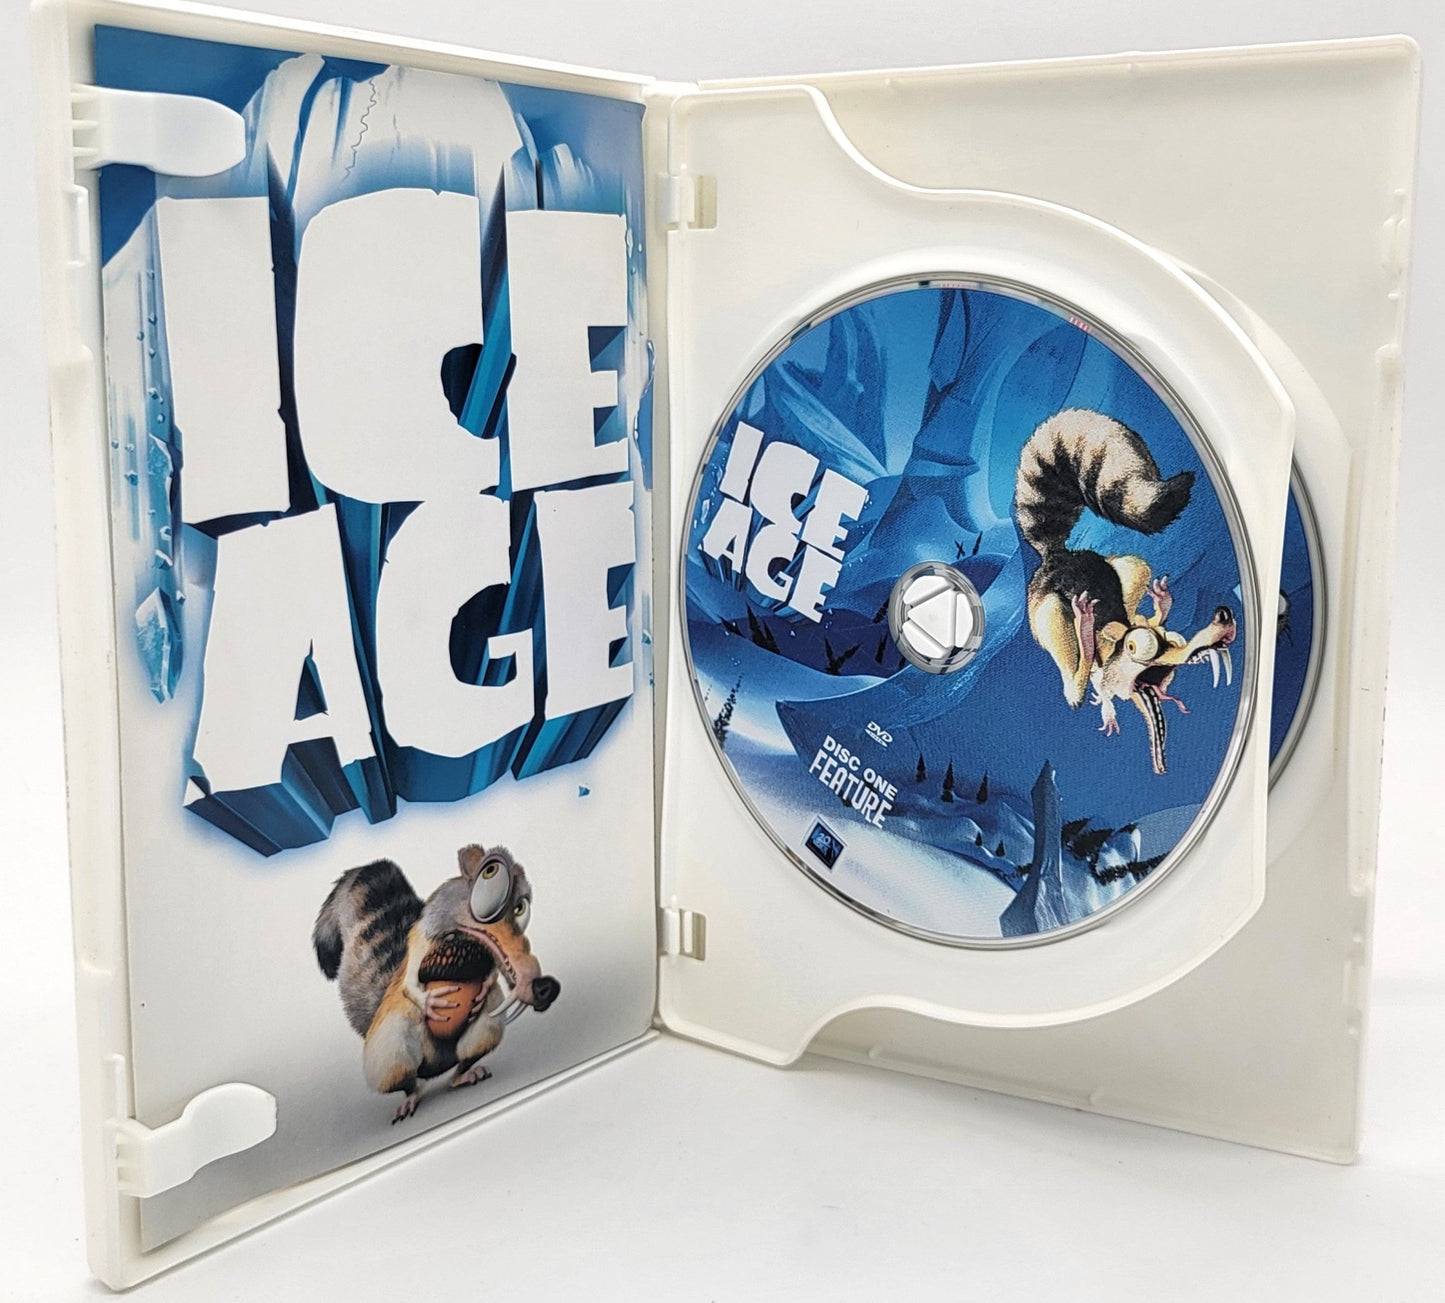 20th Century Fox Home Entertainment - Ice Age | DVD | 2 Disc Special Edition - Plus Scrat's Missing Adventure - DVD - Steady Bunny Shop